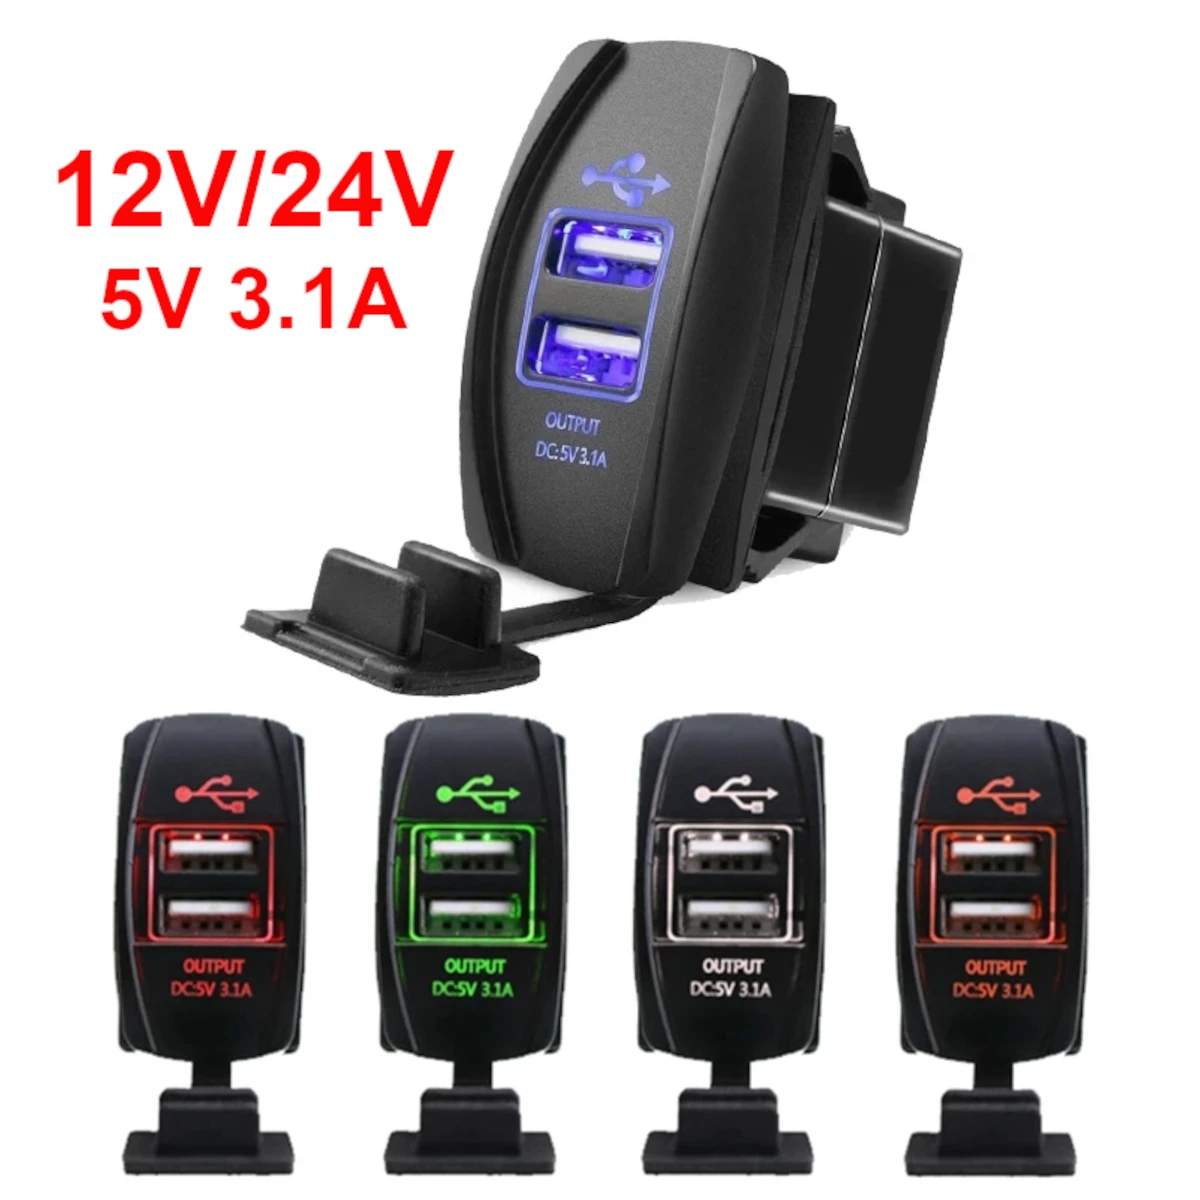 12V/24V Car Dual USB Charger Adapter 5V 3.1A Power Outlet Socket Dustproof Led for iPhone Xiaomi Redmi Samsung Car Motorcycle RV